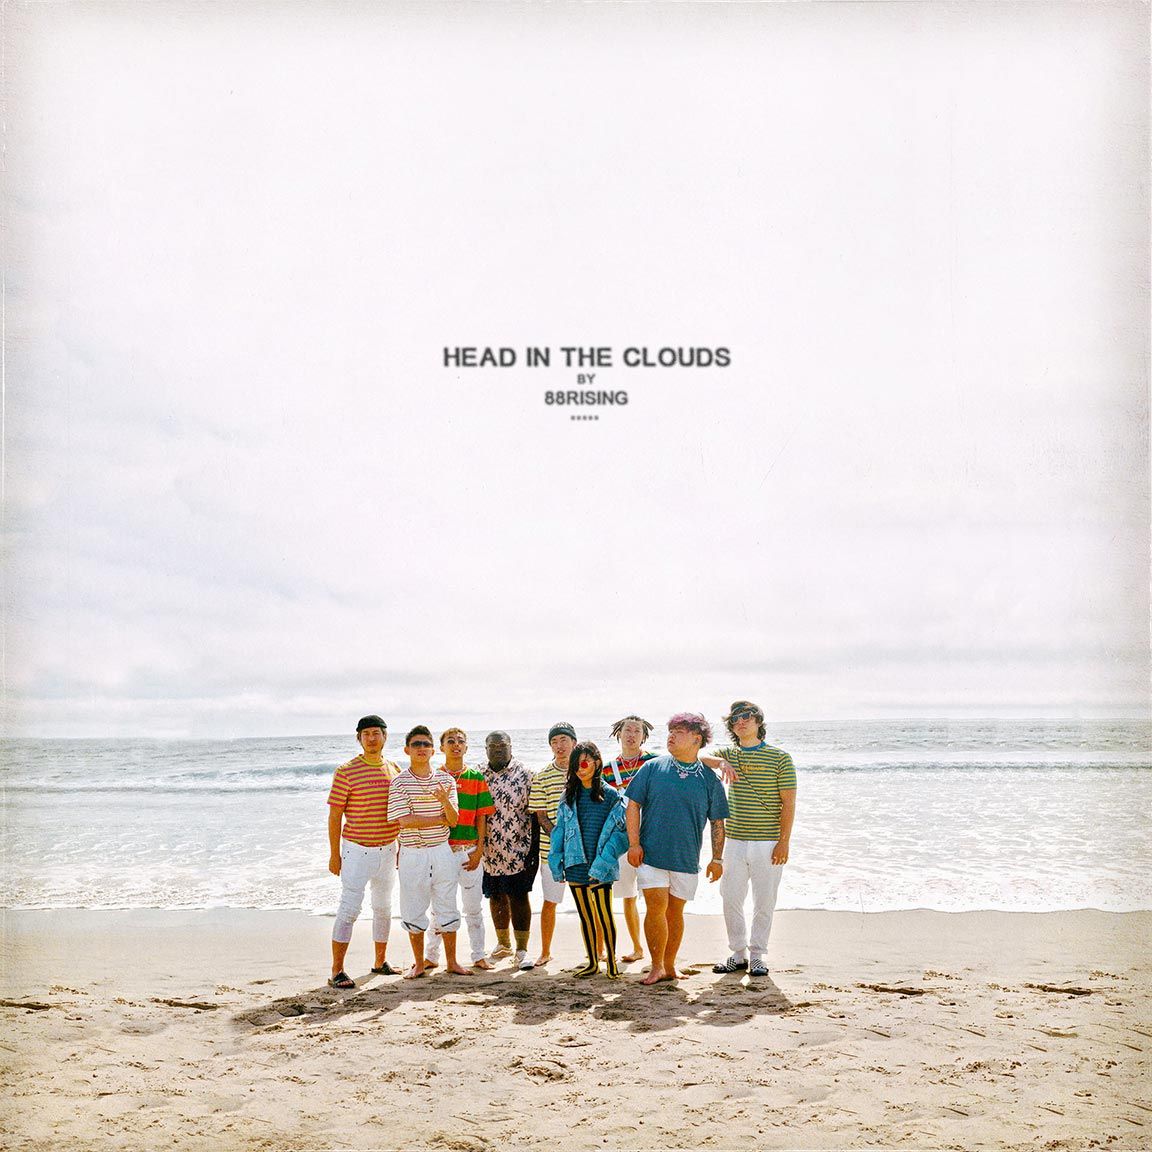 Head in the Clouds – The 88rising Shop